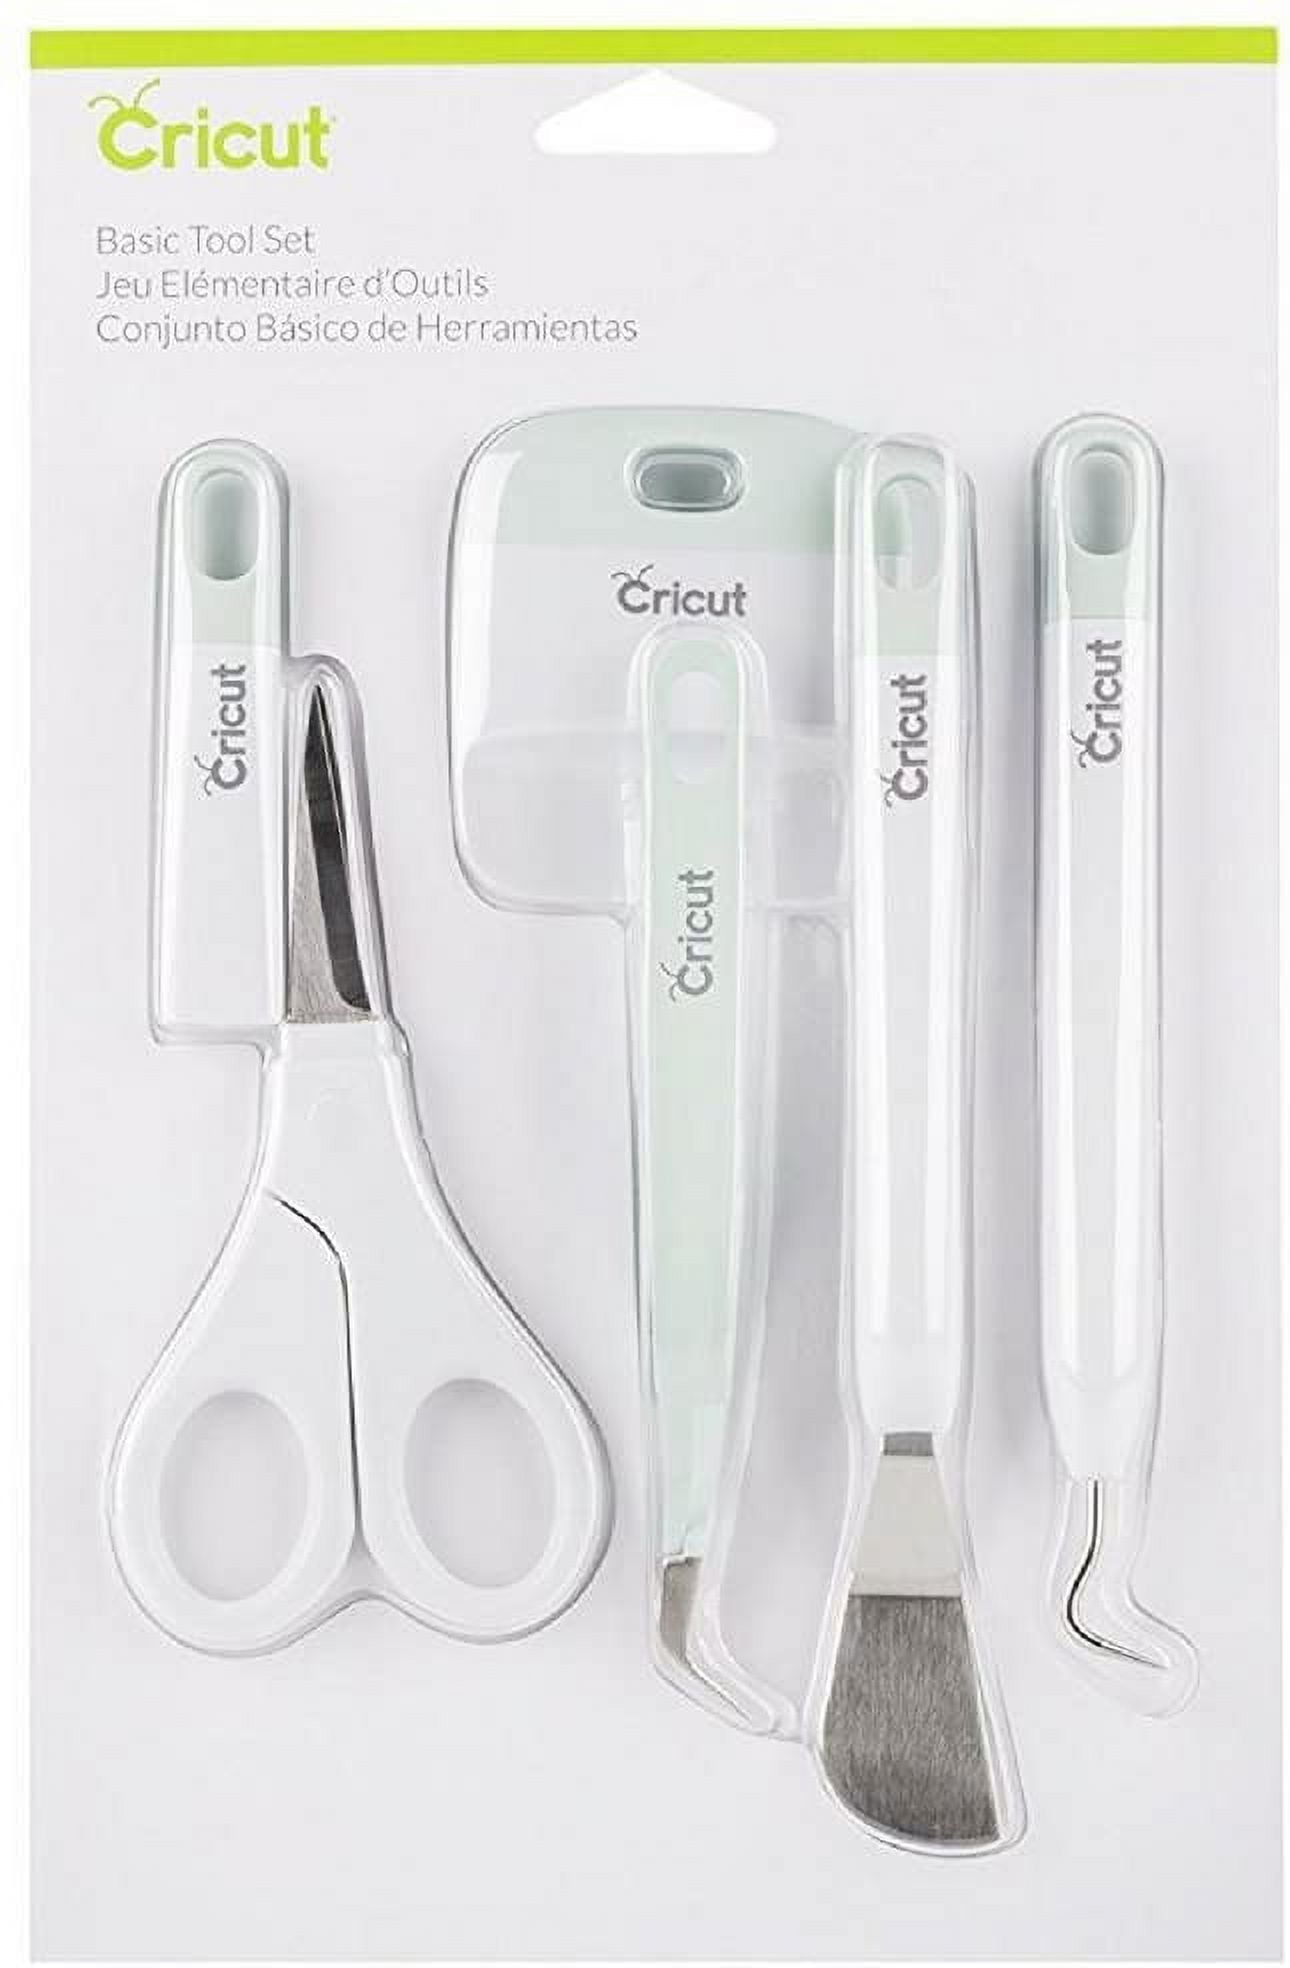 Knife Blade and Drive Housing for Cricut Maker Cricut Tool Set-Perfect for  Balsa Wood, Mat Board, Chipboard and More